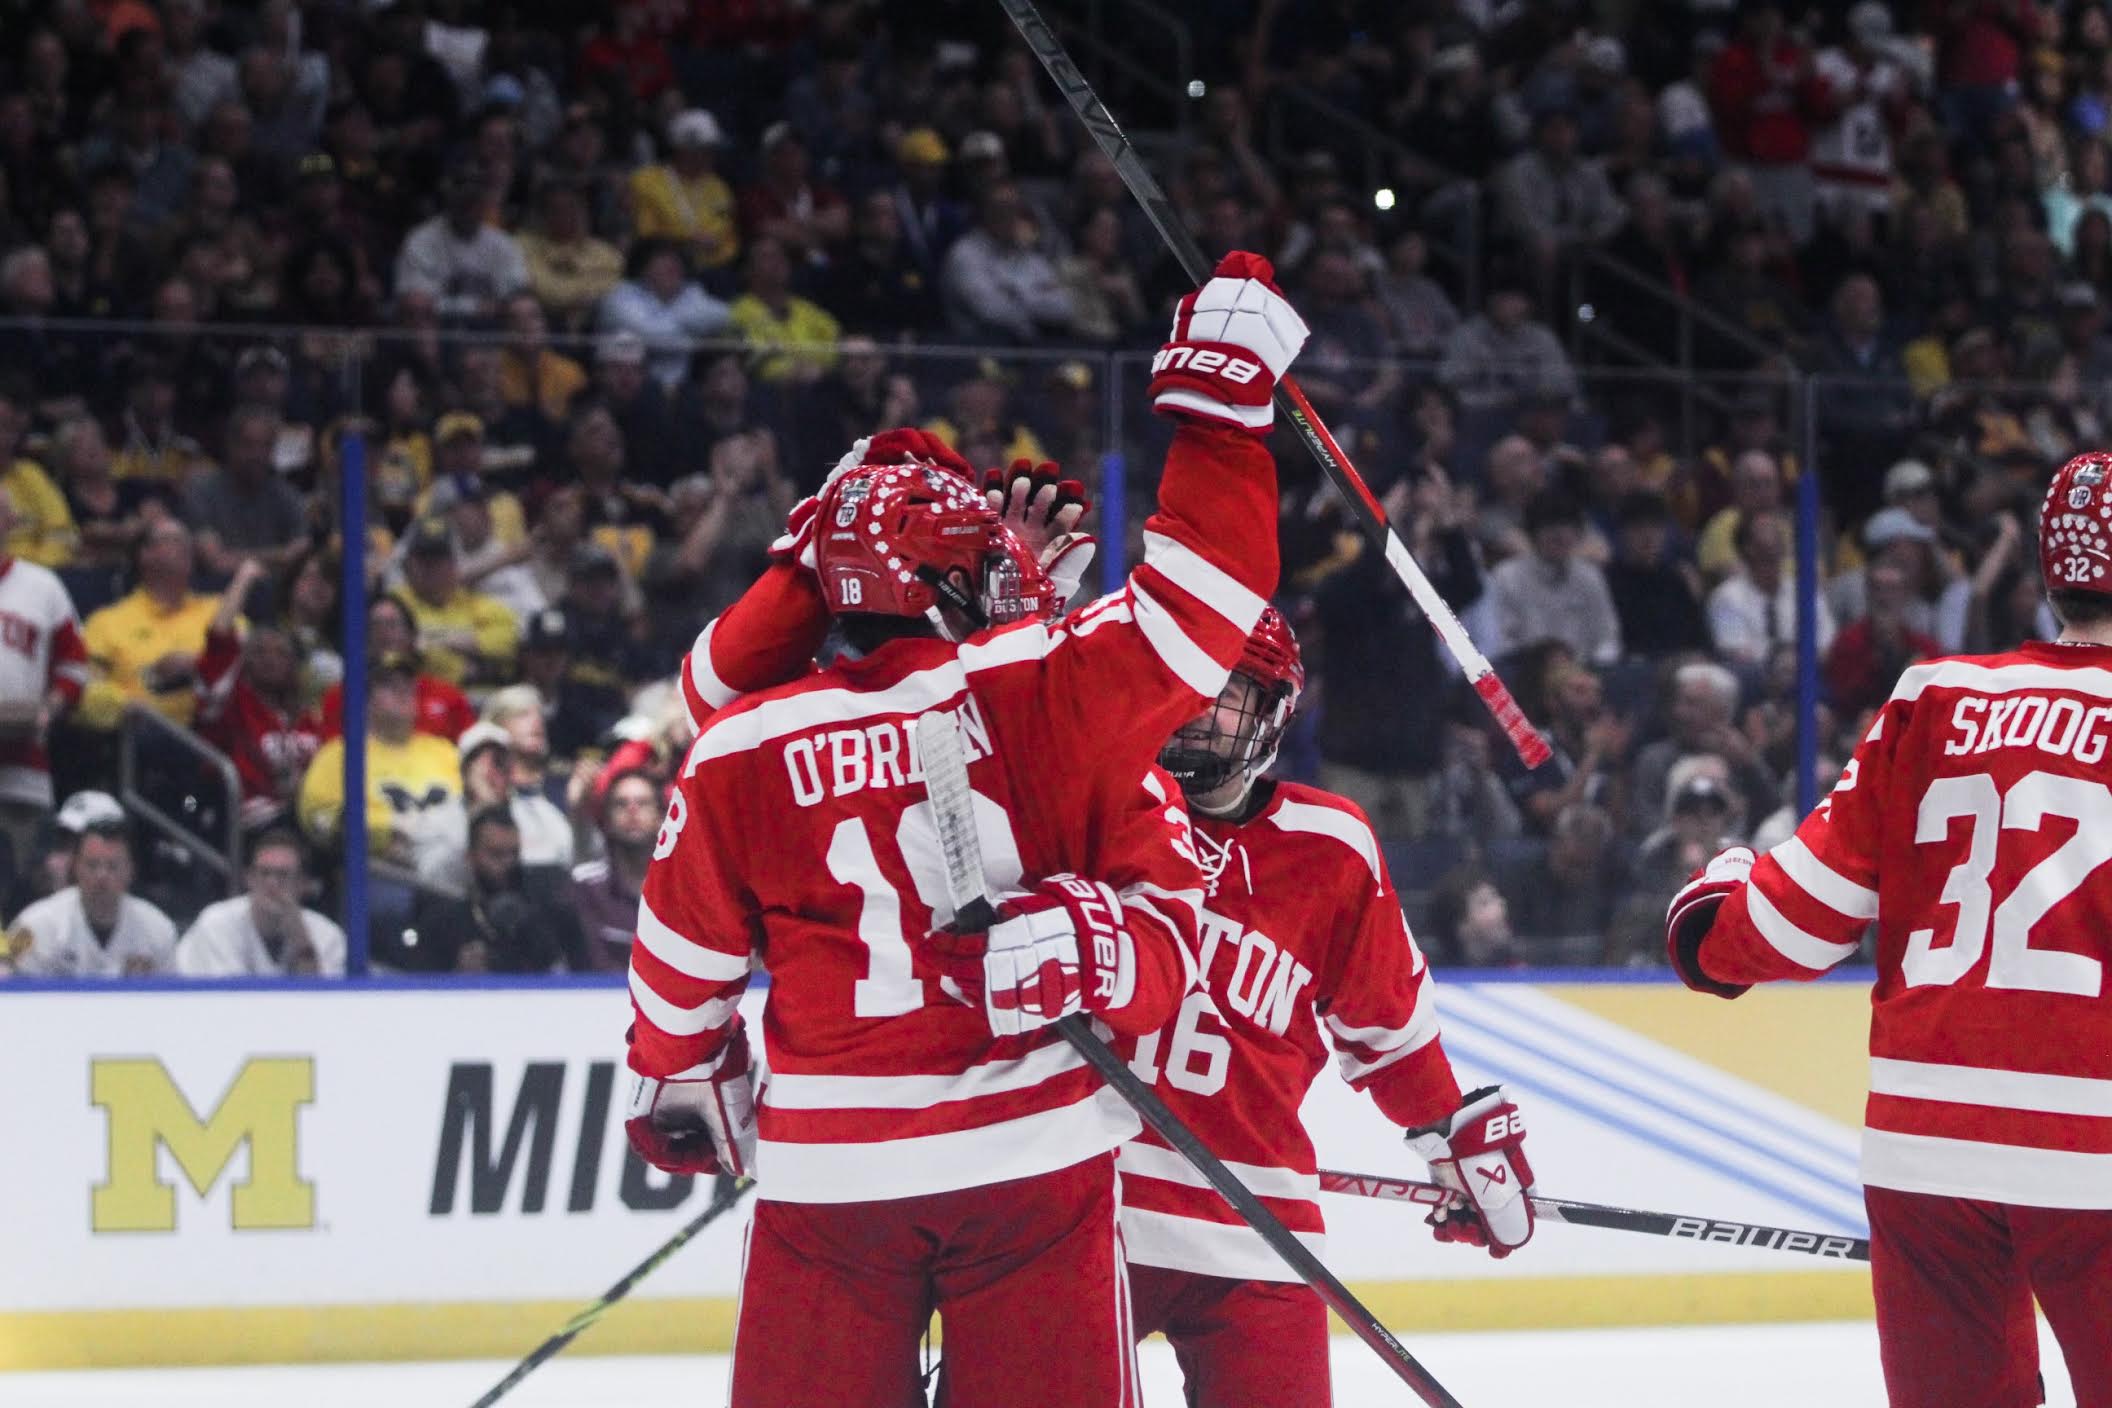 Terriers face Maine for two nights at Agganis – The Boston Hockey Blog